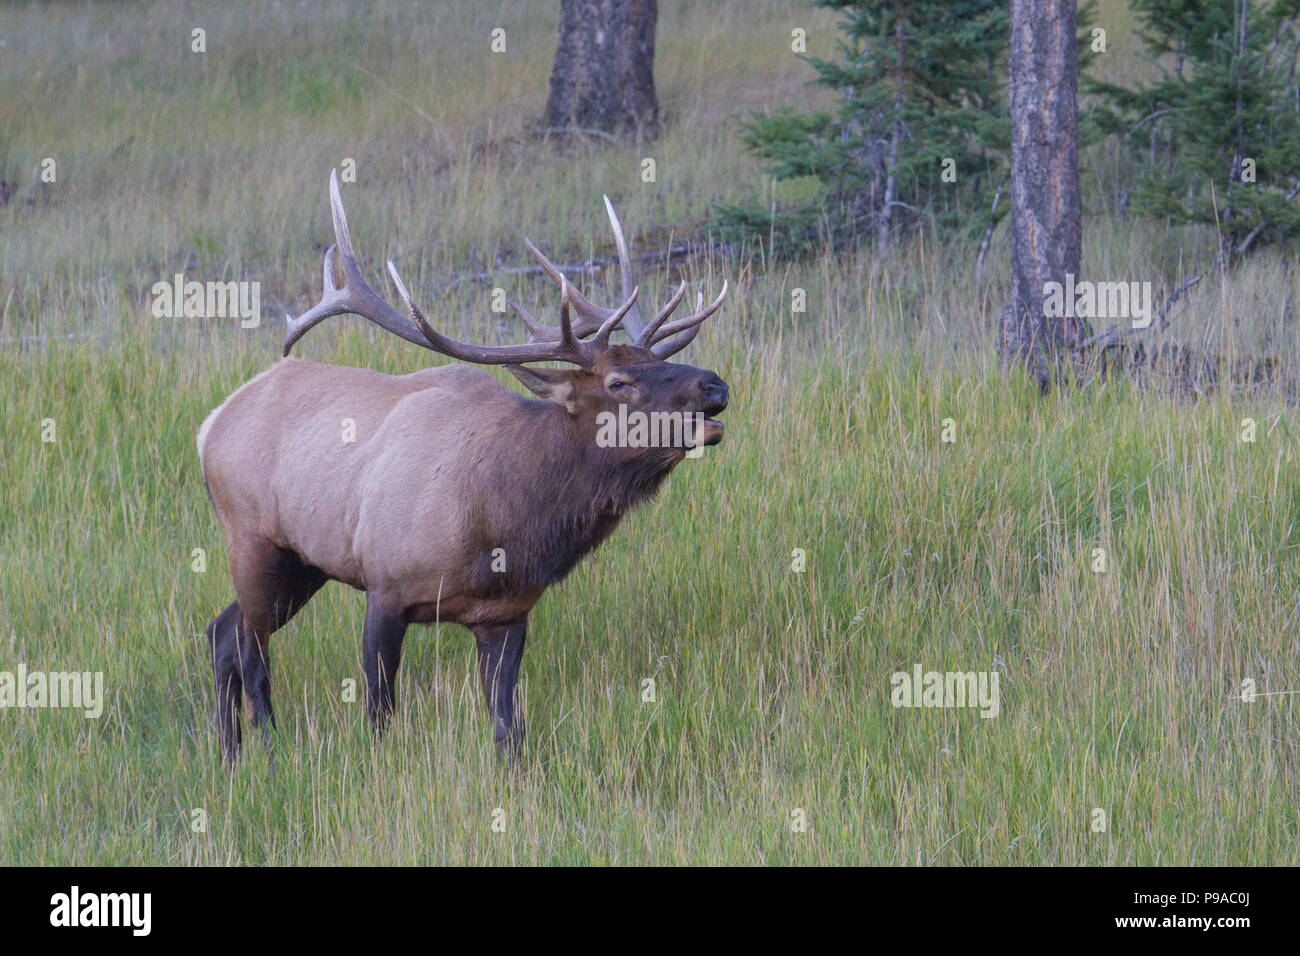 A nice bull elk, Cervus canadensis, bugling during the rut. Stock Photo